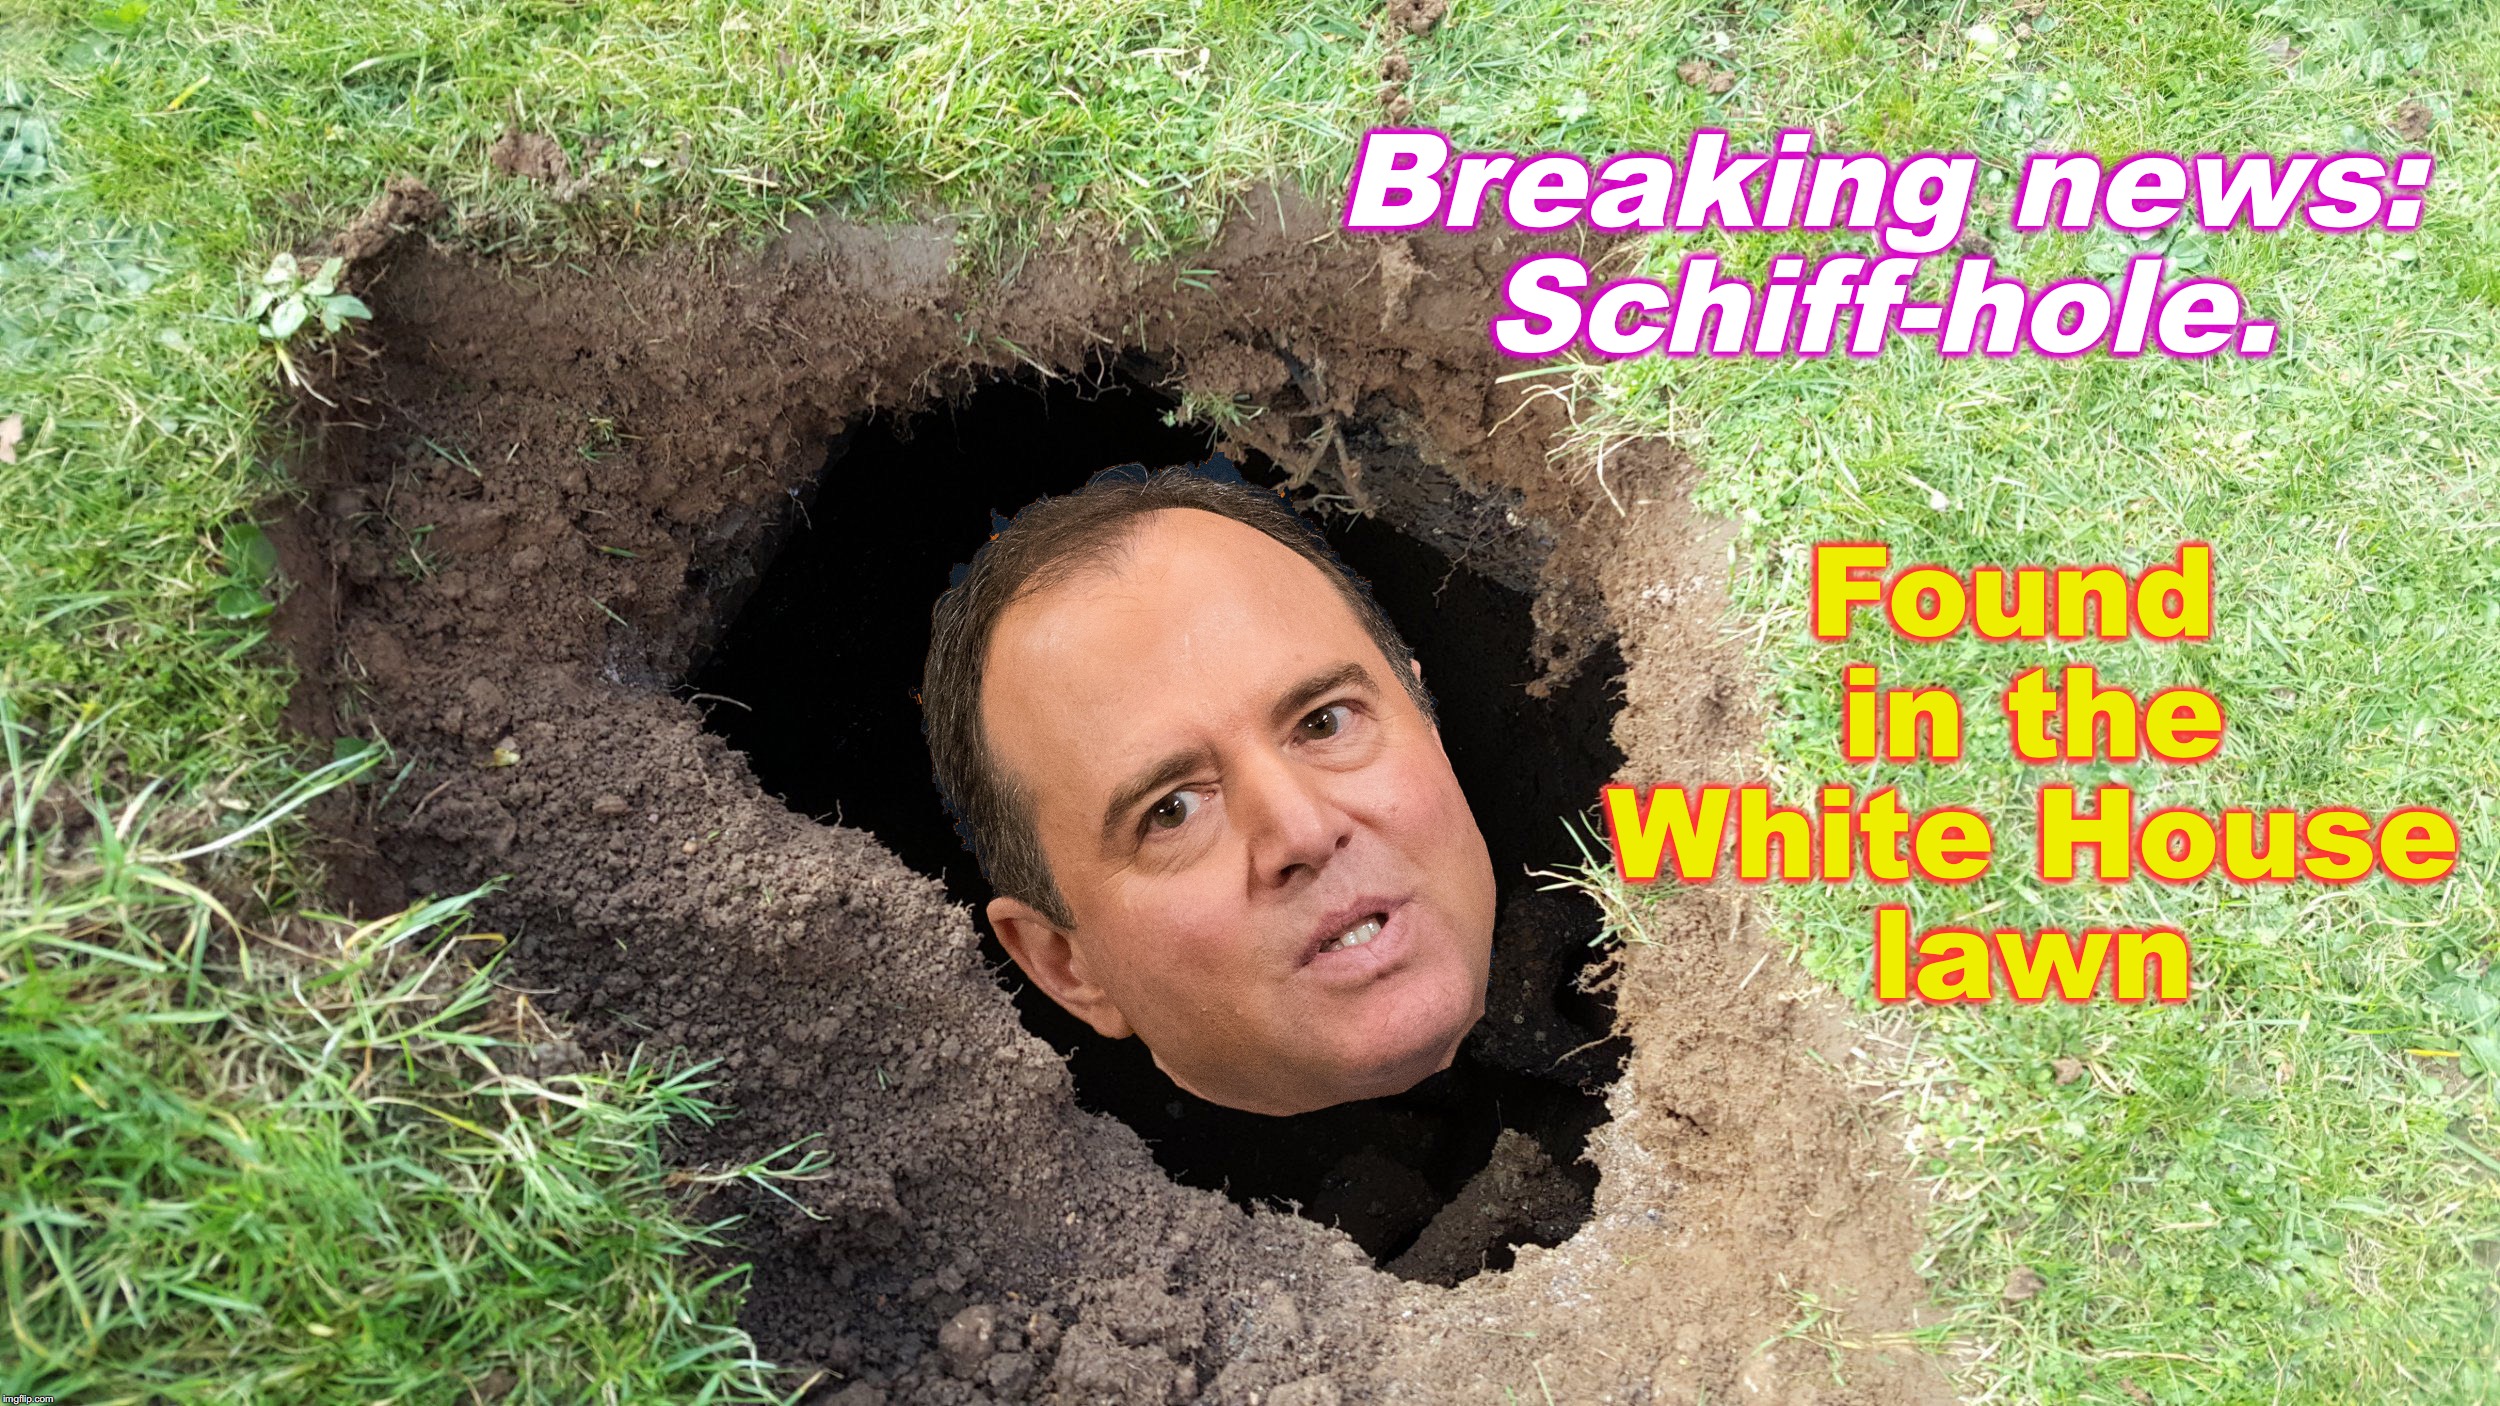 Found in the White House lawn; Breaking news: Schiff-hole. | image tagged in shithole | made w/ Imgflip meme maker